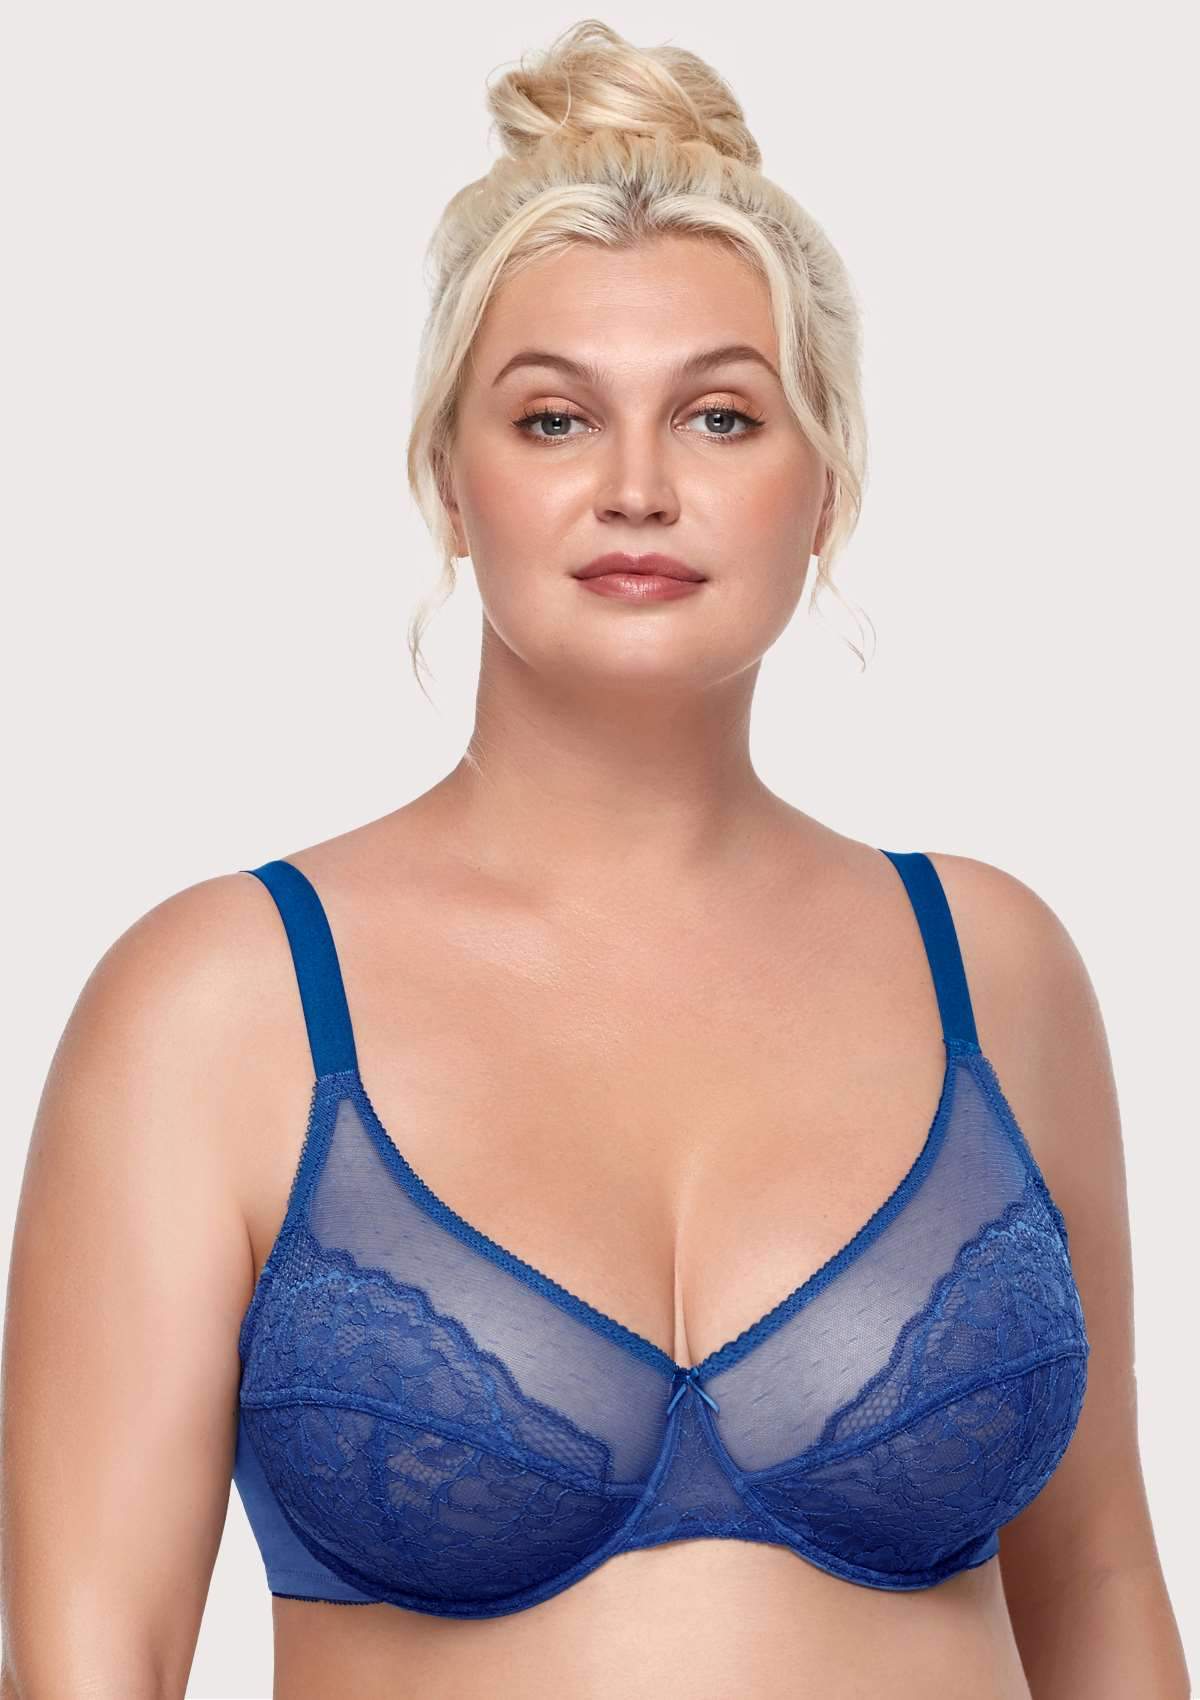 HSIA Enchante Full Coverage Bra: Supportive Bra For Big Busts - Balsam Blue / 38 / D